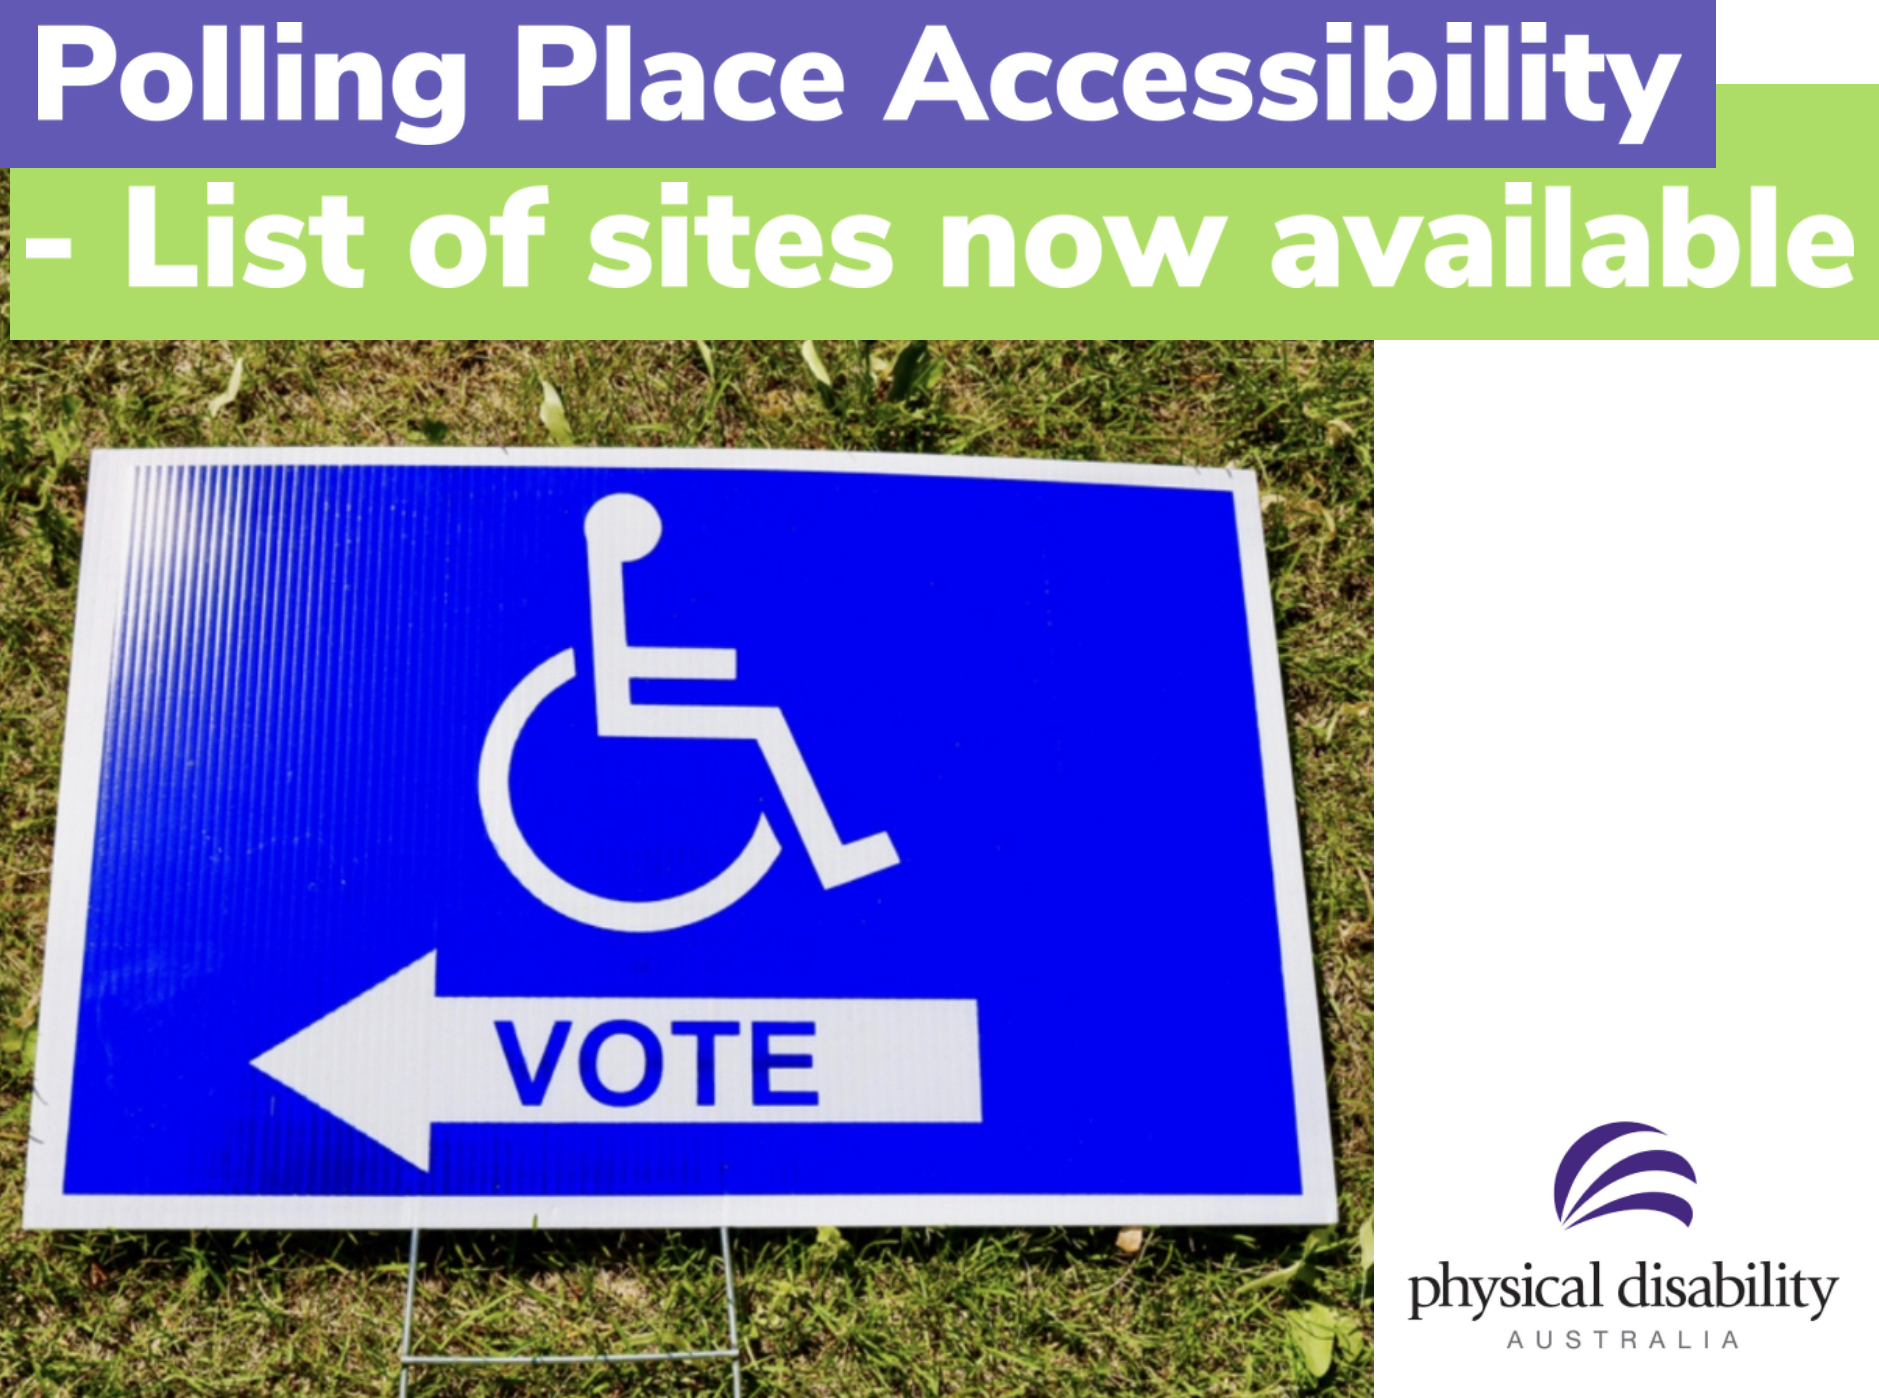 The Australian Electoral Commission (AEC) has just released a list of polling places  with an accessibility rating to assist people with disabilities or mobility restrictions. 